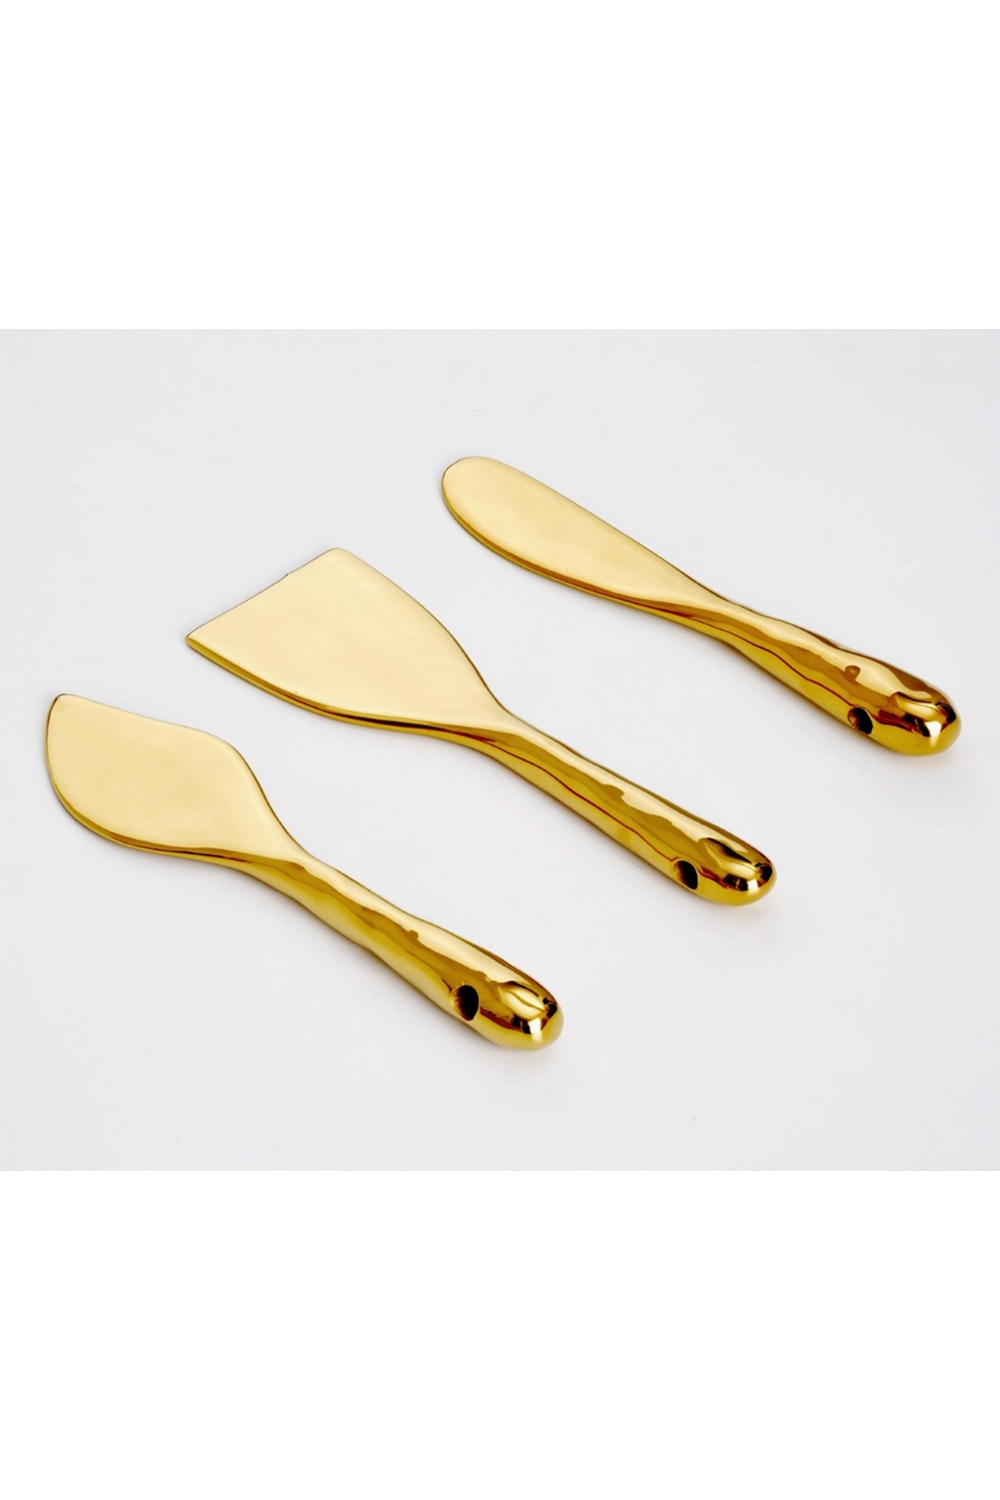 Set of 3 Chunky Gold Cheese Knives